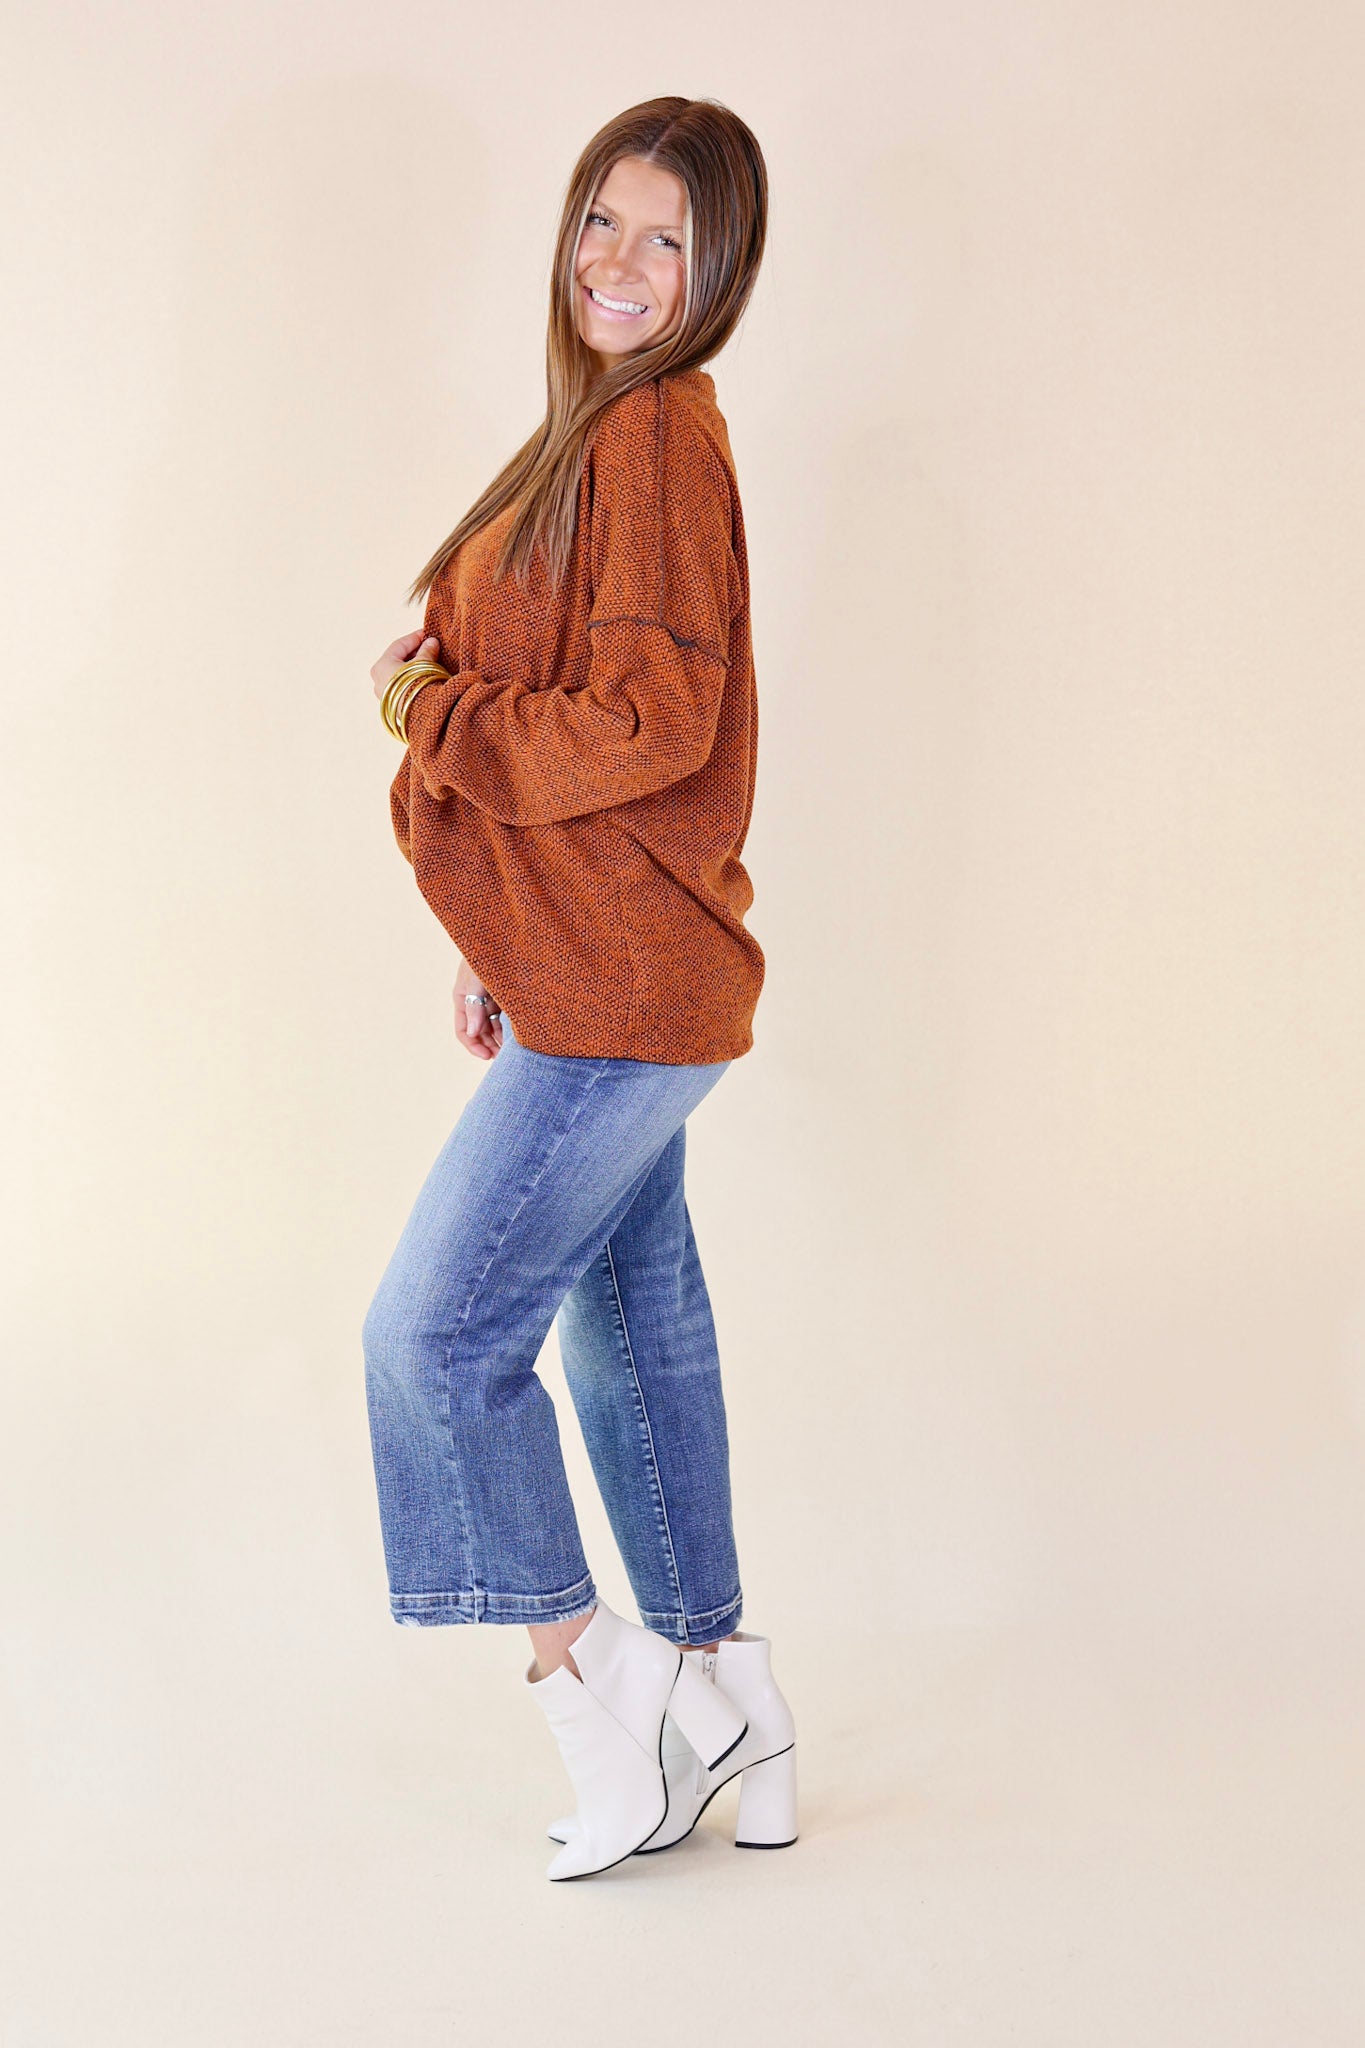 Fall Festival Long Sleeve Knit Top in Rust Orange - Giddy Up Glamour Boutique